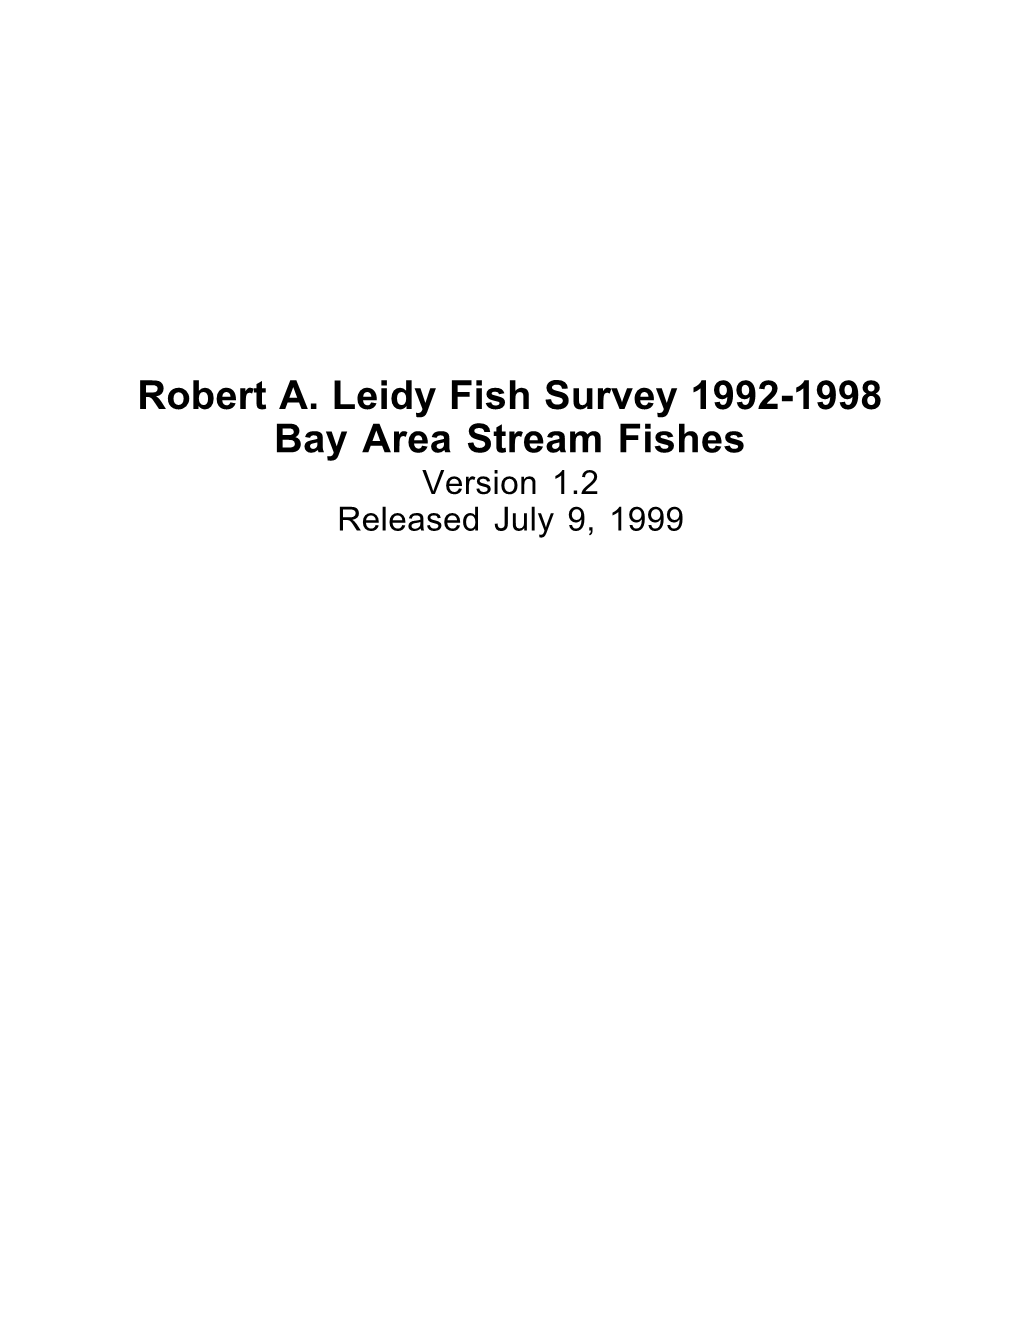 Robert A. Leidy Fish Survey 1992-1998 Bay Area Stream Fishes Version 1.2 Released July 9, 1999 Robert A